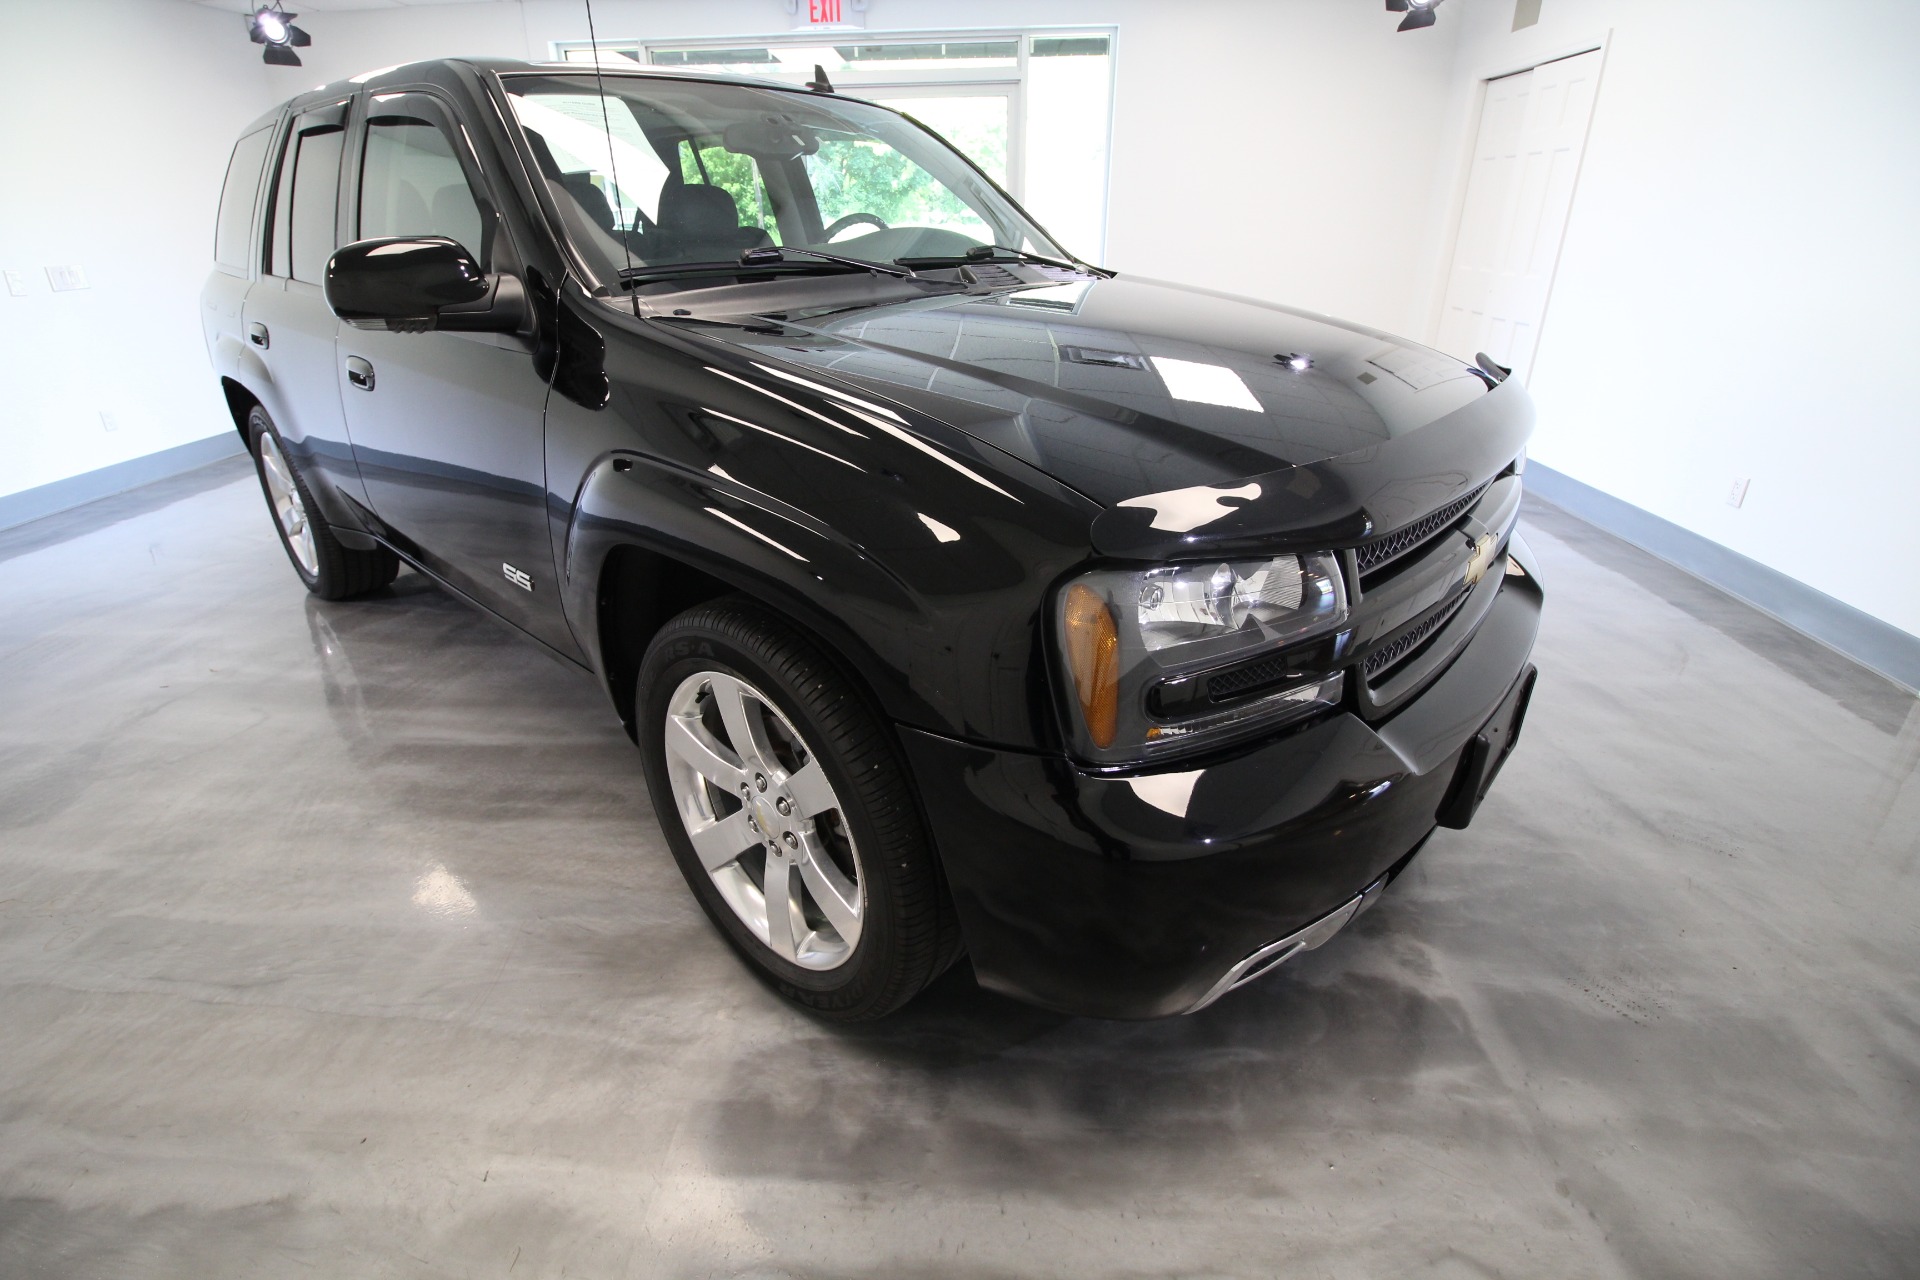 Used 2006 Black Chevrolet TrailBlazer SS LT COLLECTOR''''S QUALITY SUPERB INSIDE AND OUT LOW MILES 56K | Albany, NY